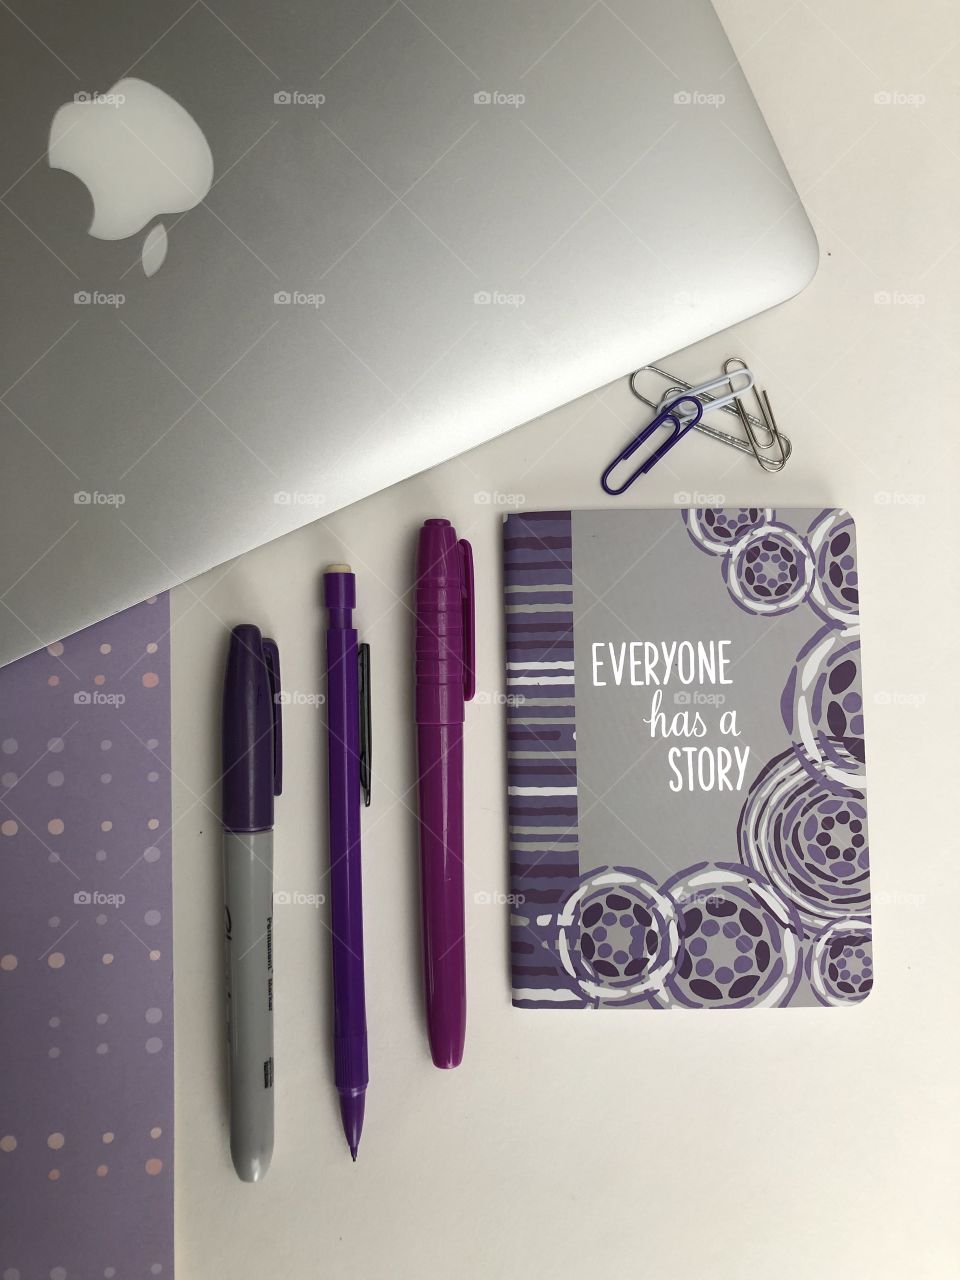 A flat lay themed in purple and mold with a laptop and a notebook with a motivational sayings on it